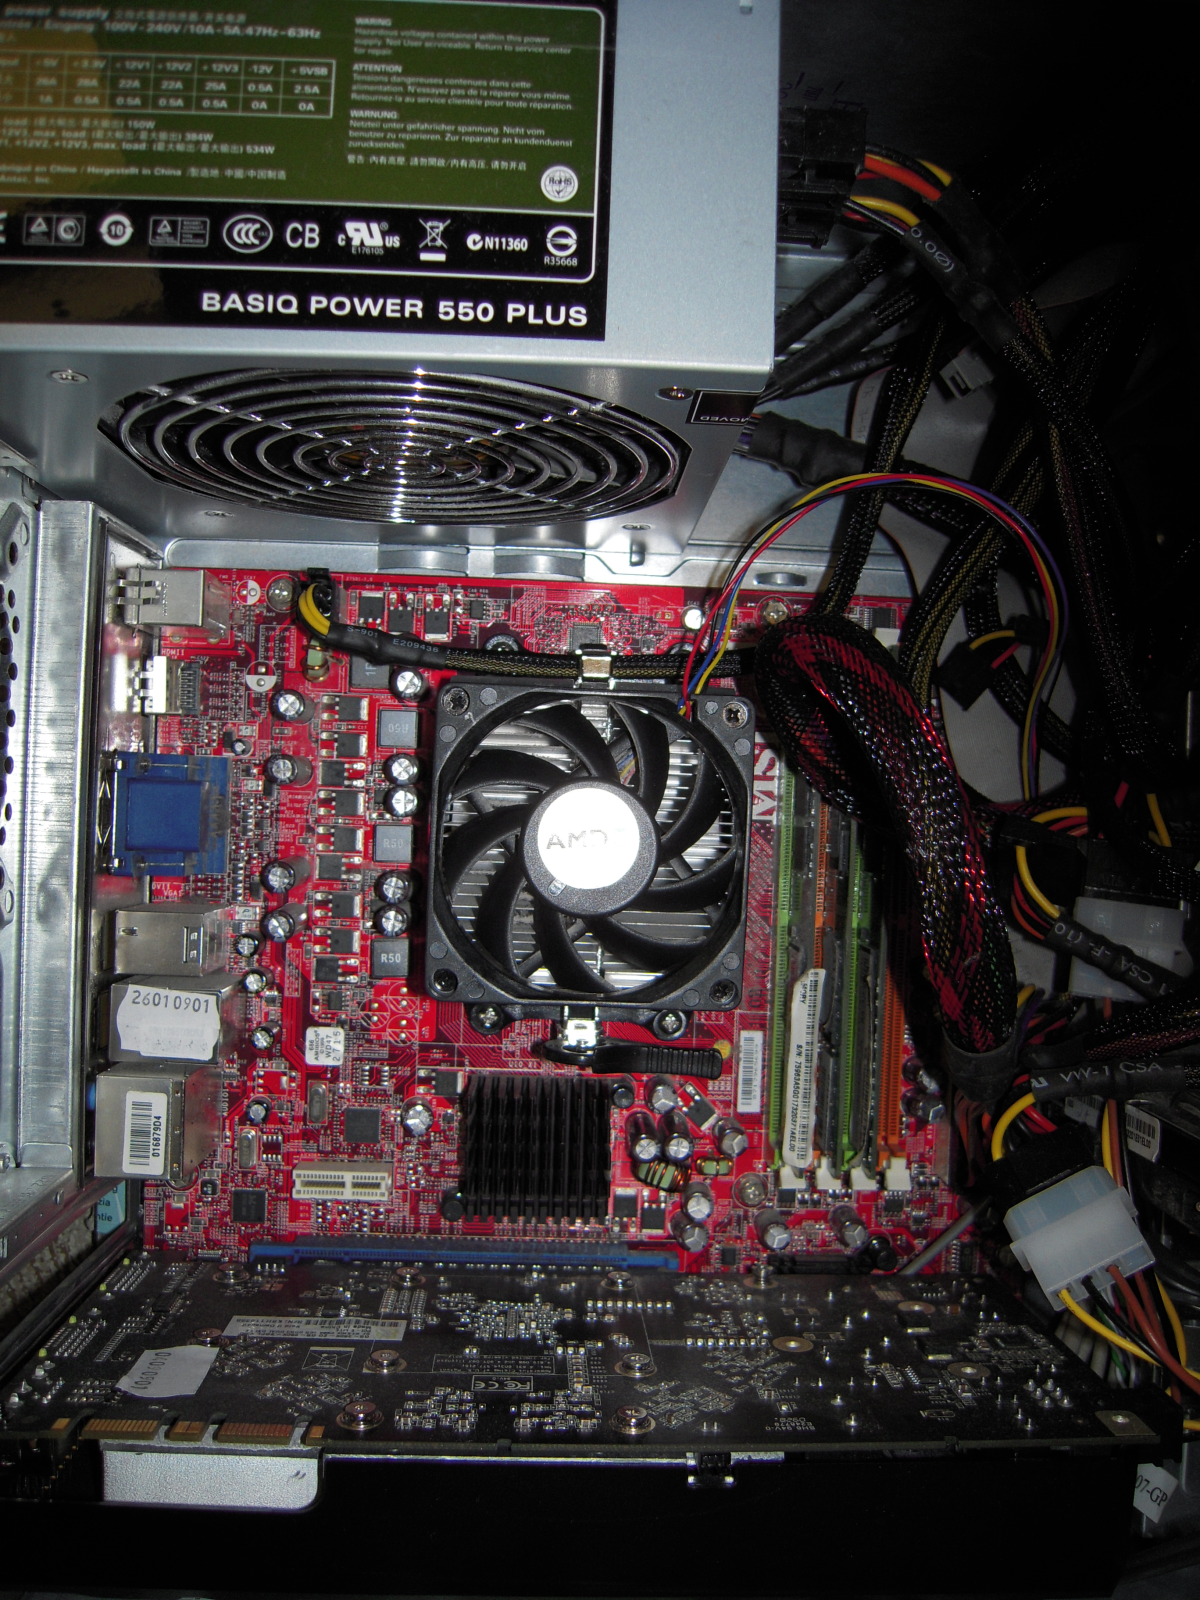 Pretty bad picture from my computer. But yeah...

2GB Ddr2 ( Gonna upgrade to 8gb ddr3 1333mhz if I get summer job. )

Amd 9350e 2.0ghz  Quad Core